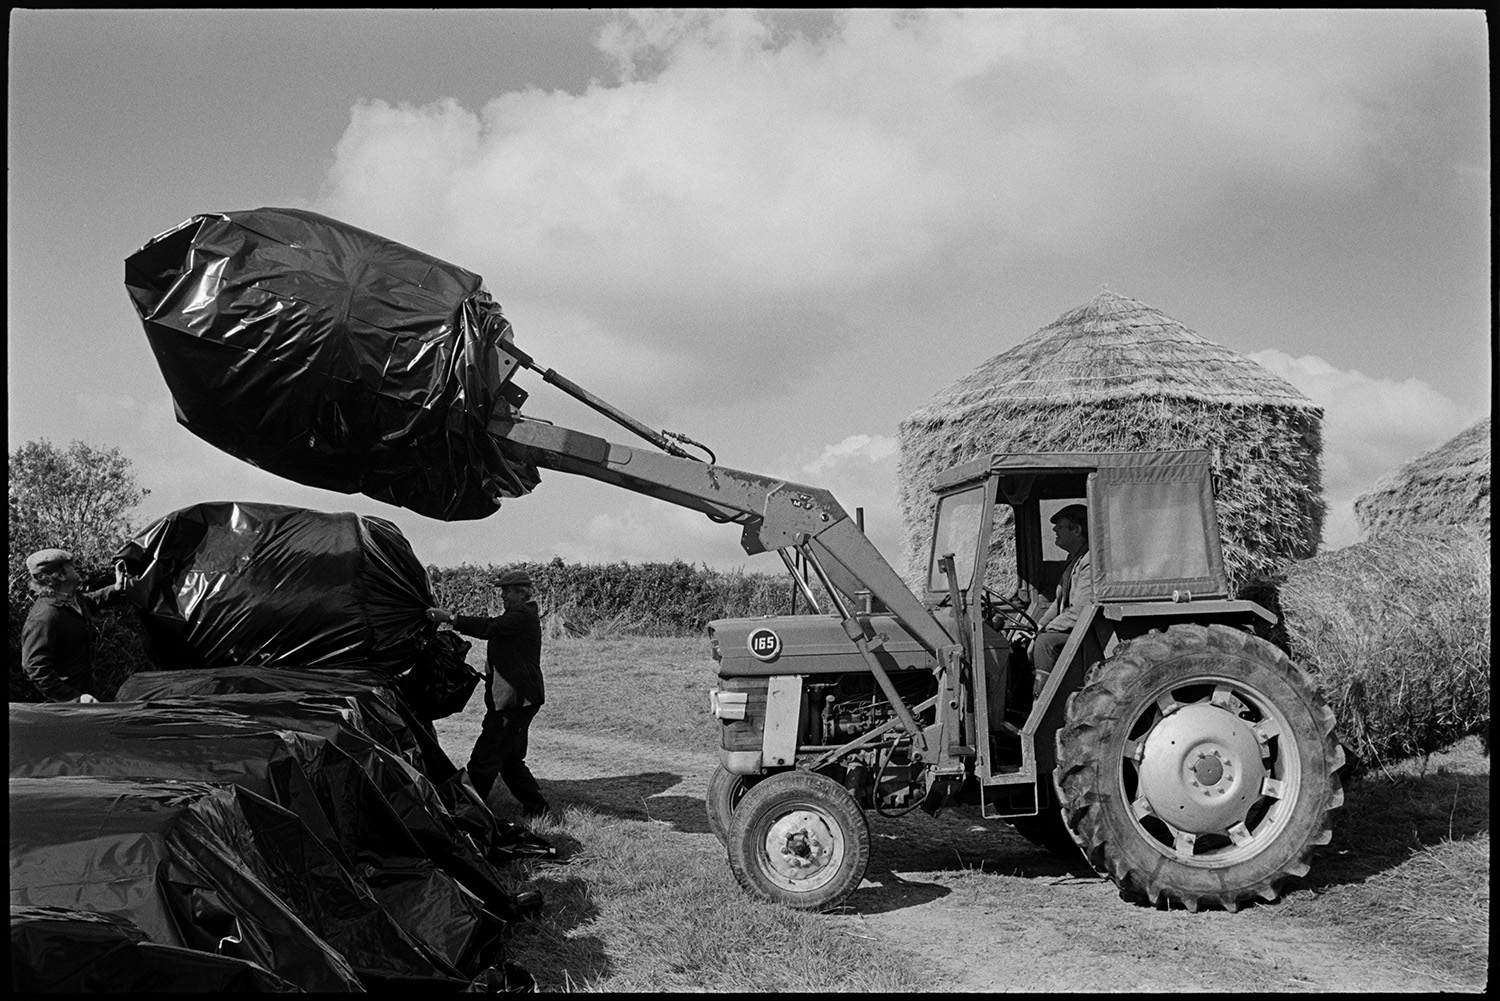 Farmer stacking large rolls of hay with tractor.
[Dudley Middleton and two other men stacking round bales wrapped in black polythene in a field at Westacott, Riddlecombe. A Massey Ferguson tractor with a forklift is loading the bales. Two wheat ricks can be seen in the background.]